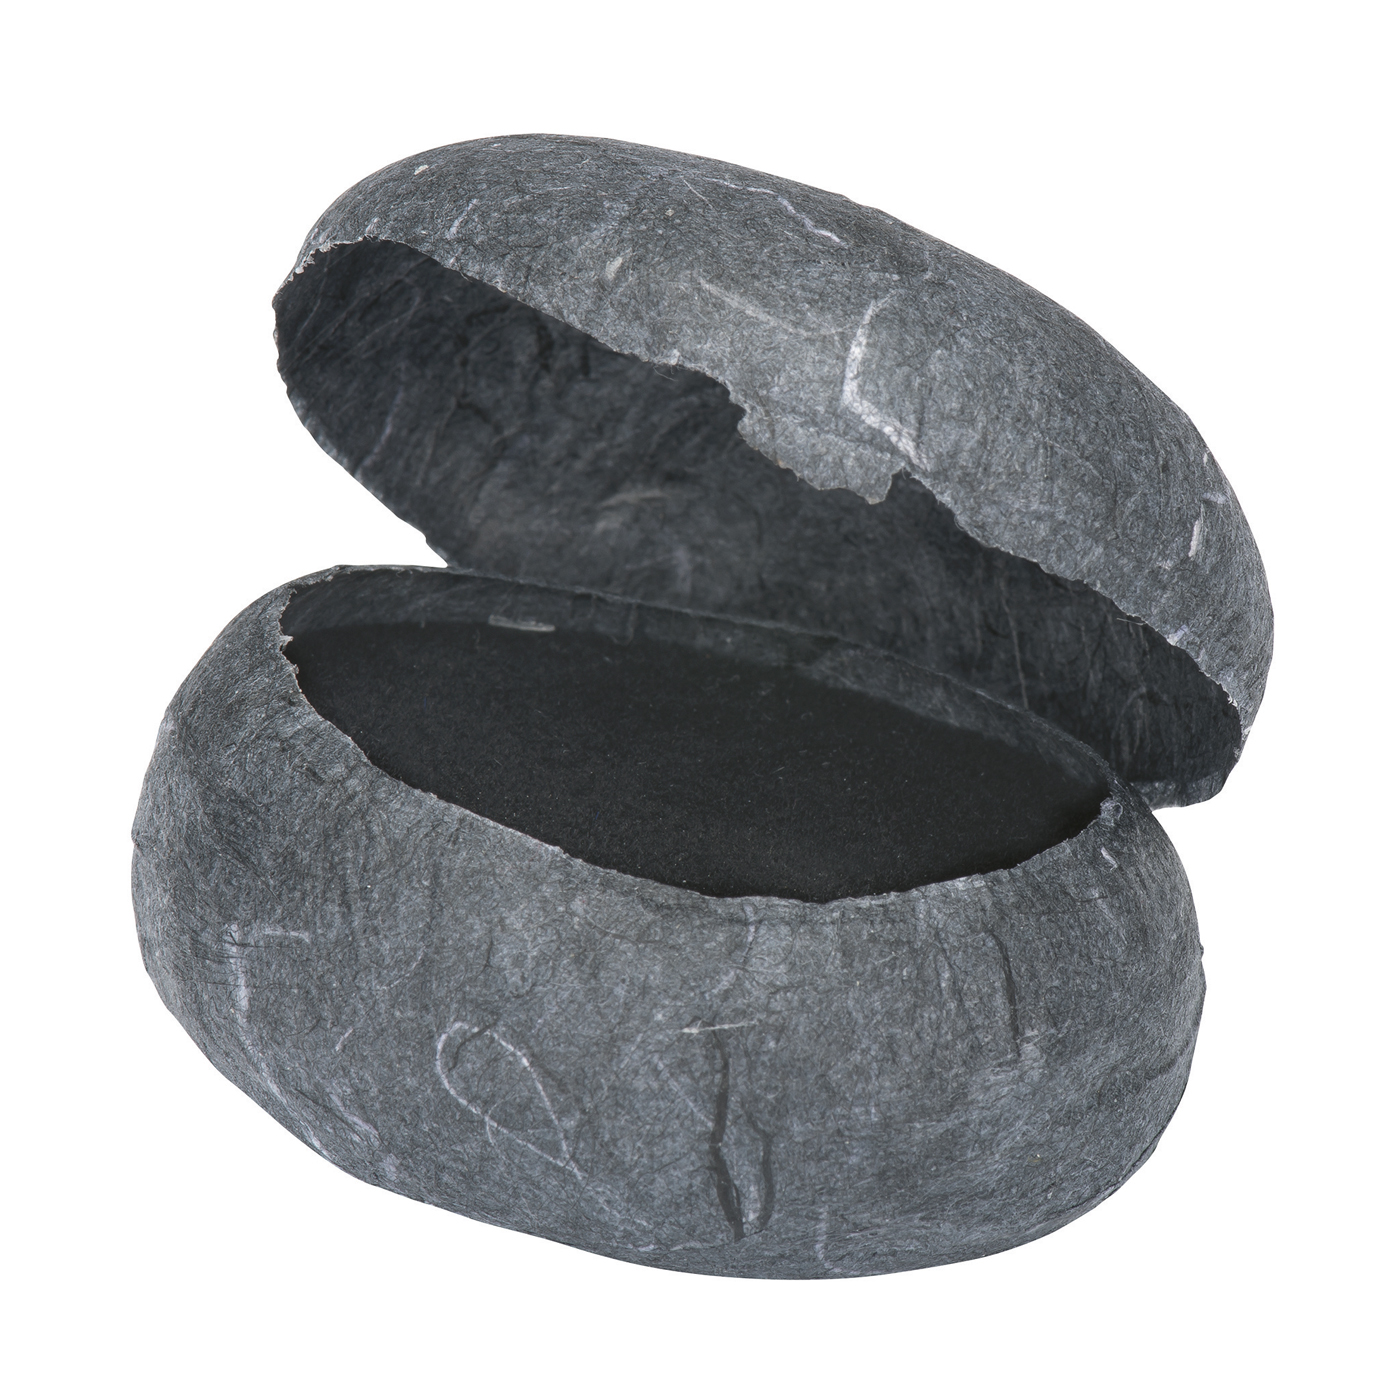 Jewellery Packaging "Stone", Anthracite Mottled, 60x50x35 mm - 1 piece